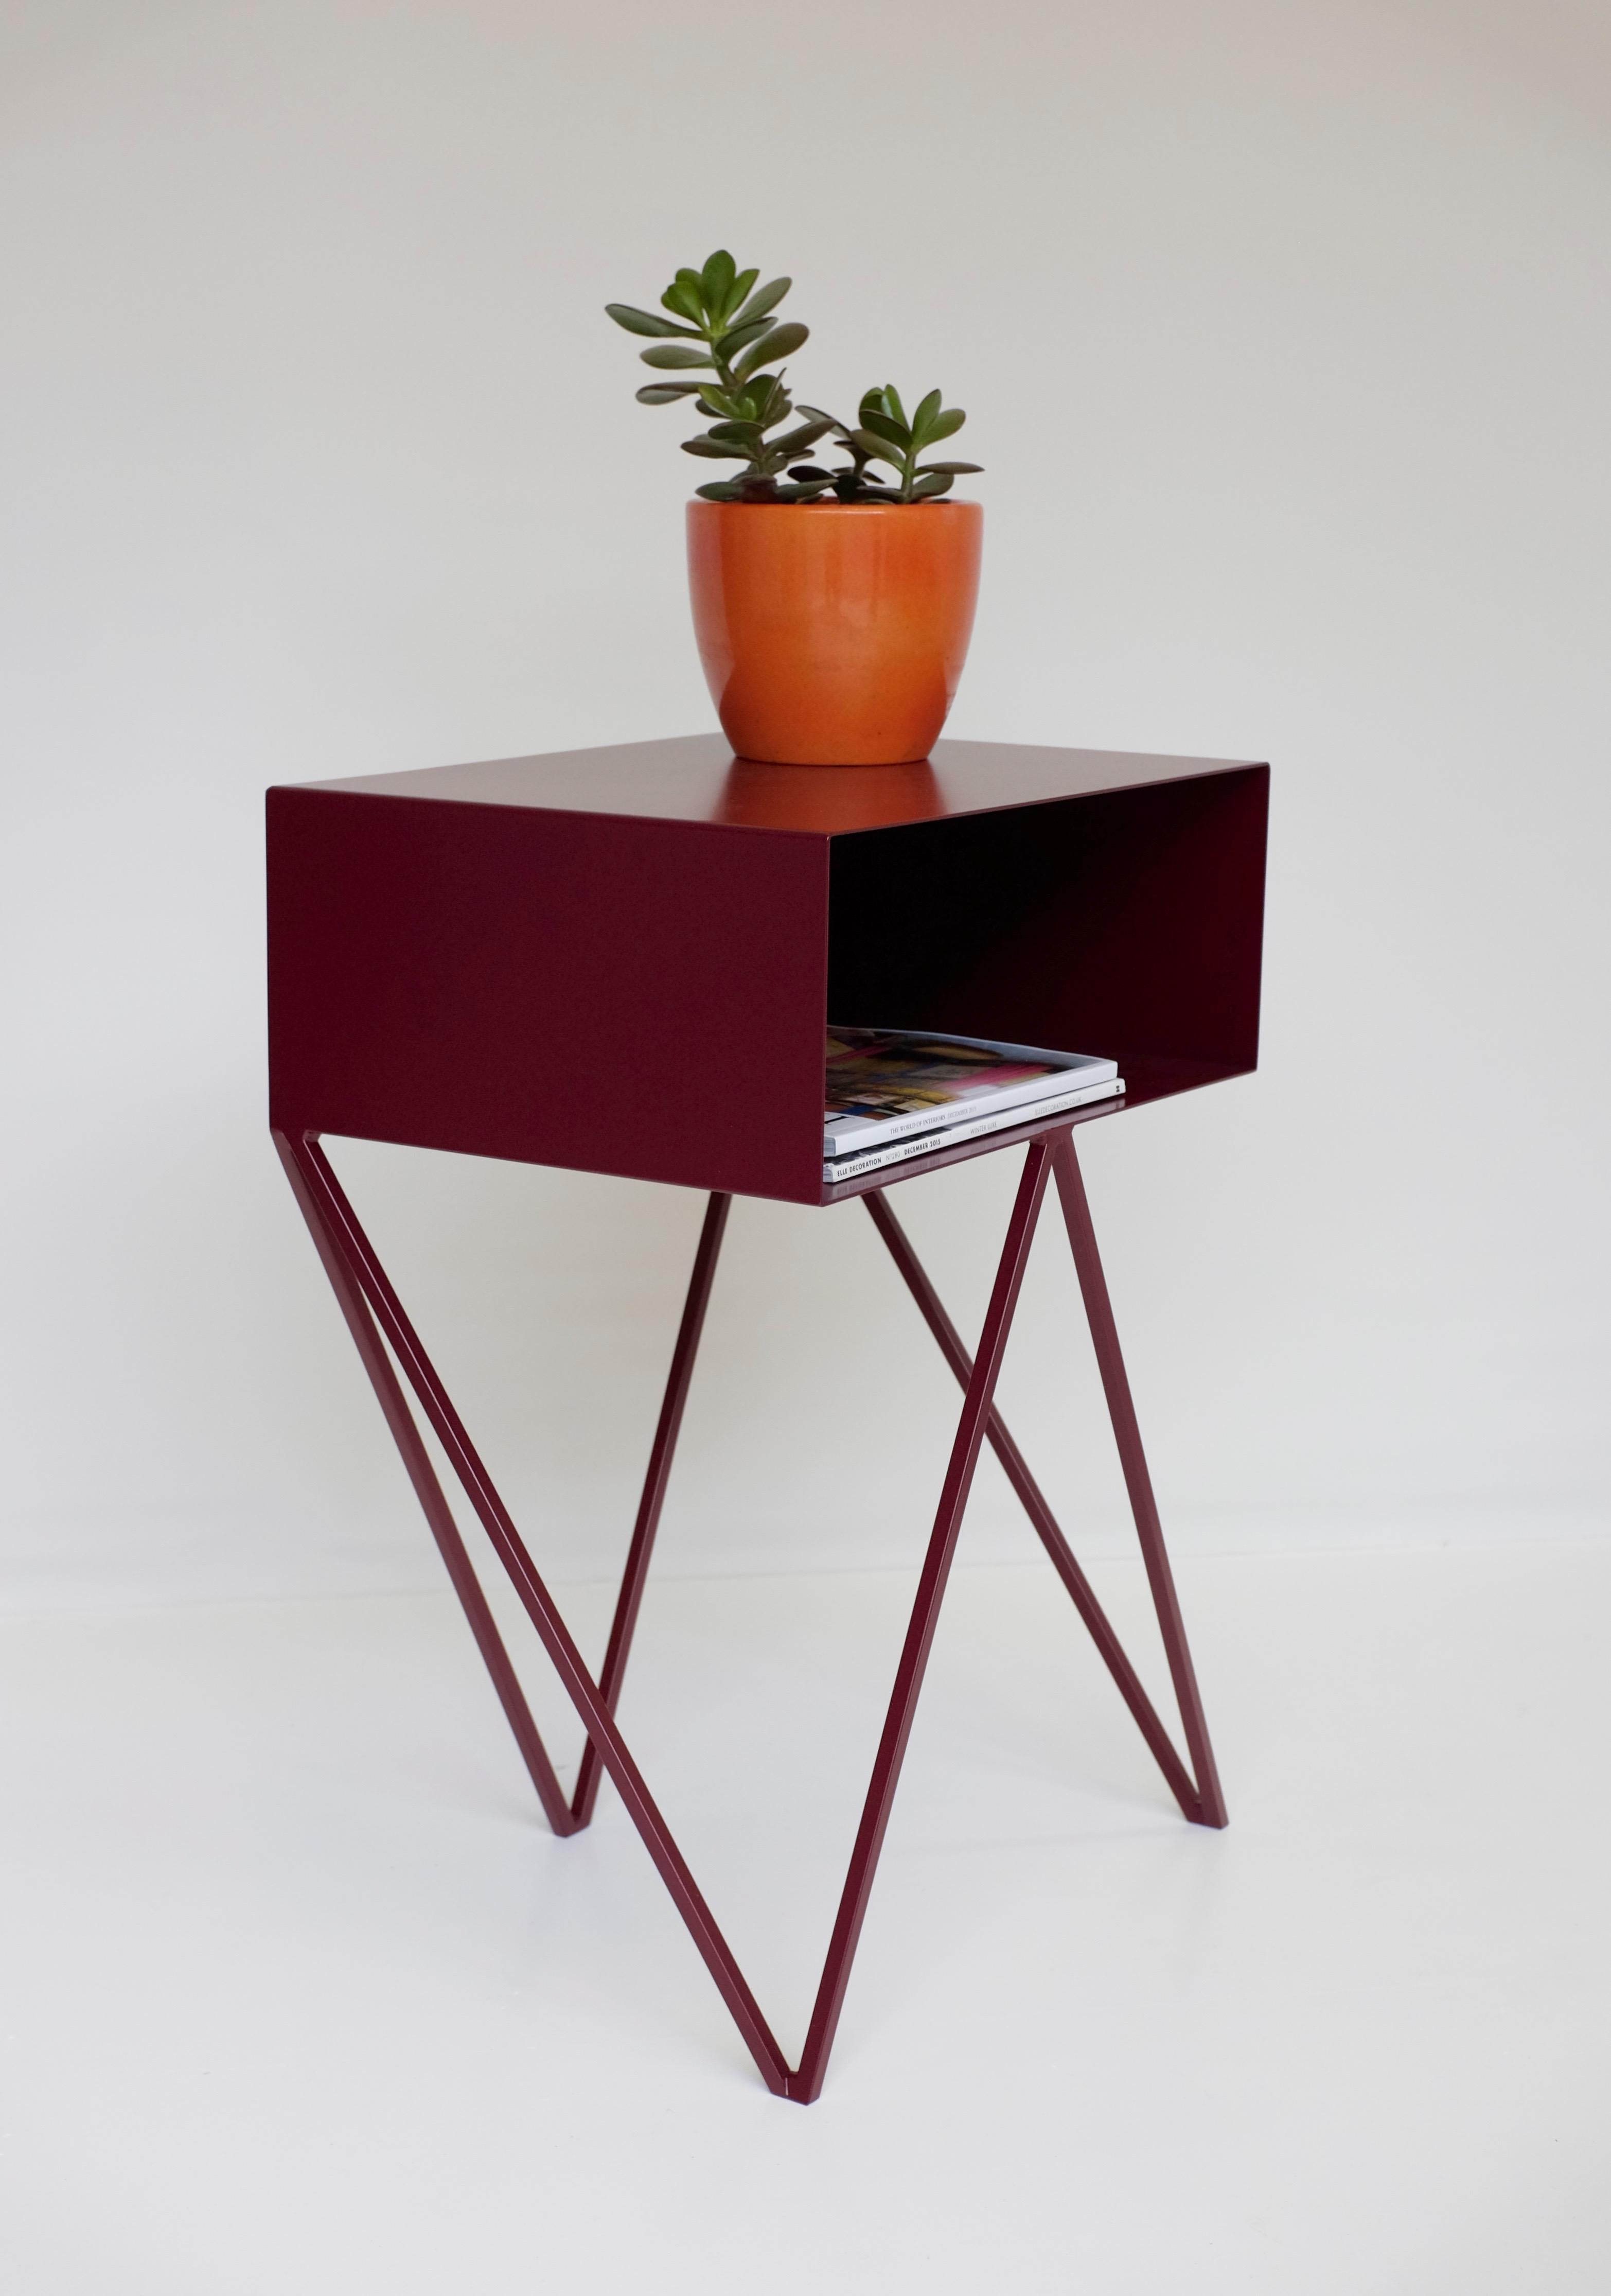 Our all-time best-seller the Robot side table features an open shelf on zig zag legs. A fun and functional design made of solid steel, powder-coated in burgundy or beetroot, as we like to call it. The clean lines look great against period details as